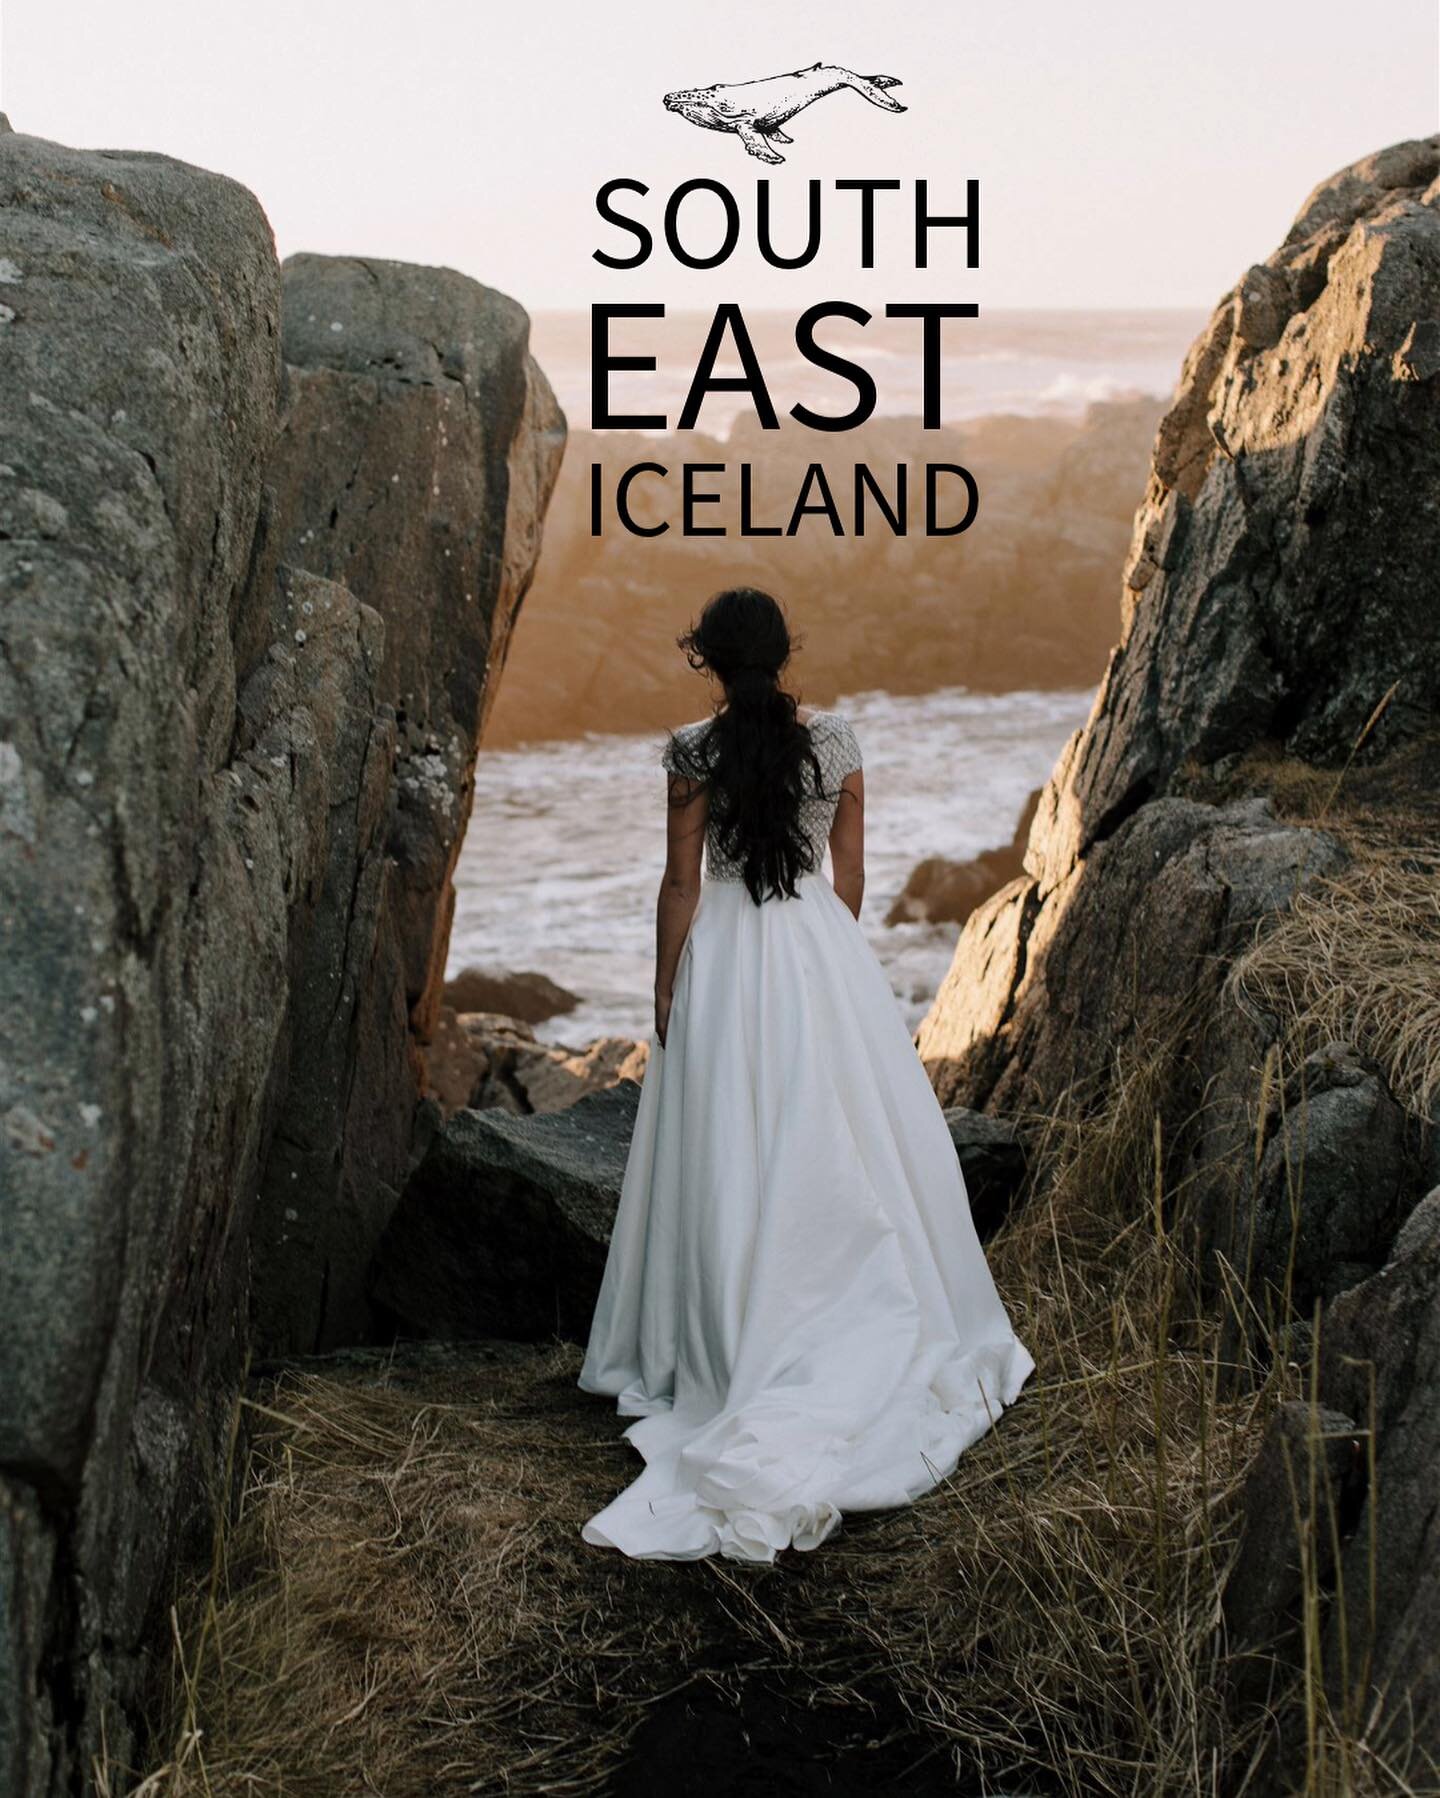 South East Iceland a love story. Do you have a favourite location in that part of Iceland?

The majestic landscapes of the south east keep drawing us to this more remote corner of the island. It&rsquo;s a long drive but so utterly worth it when you g